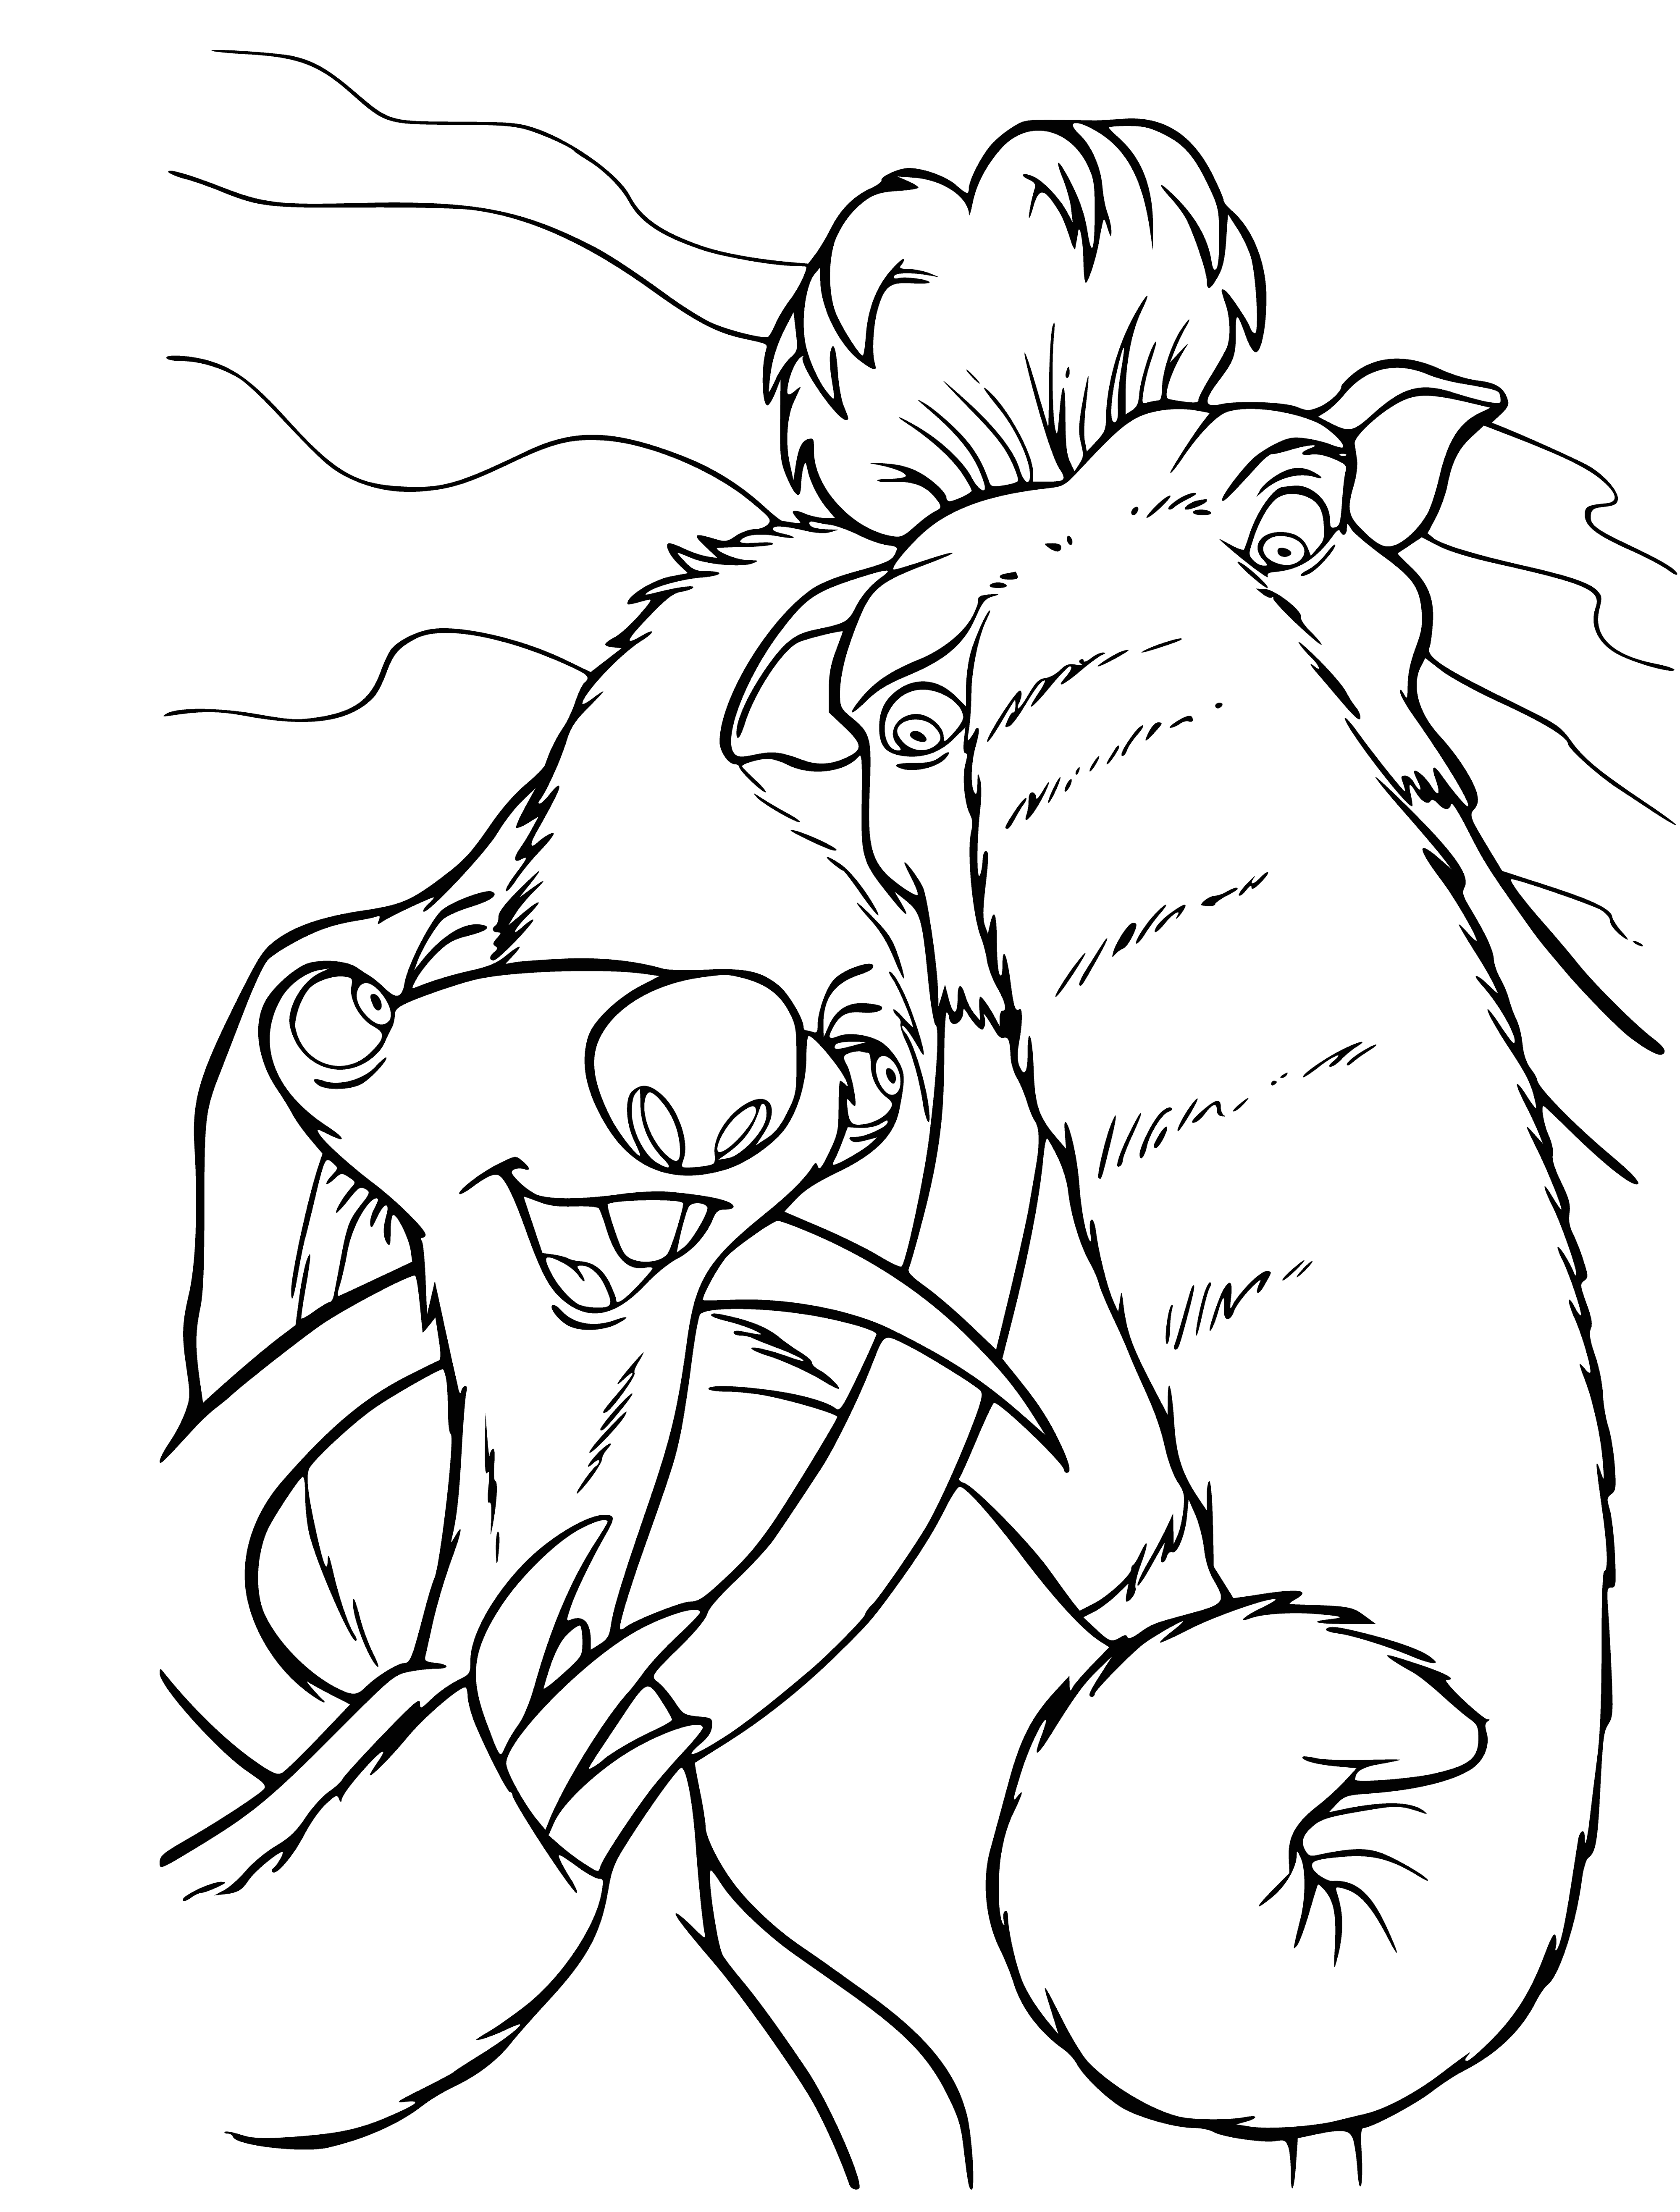 Sid and Manny coloring page